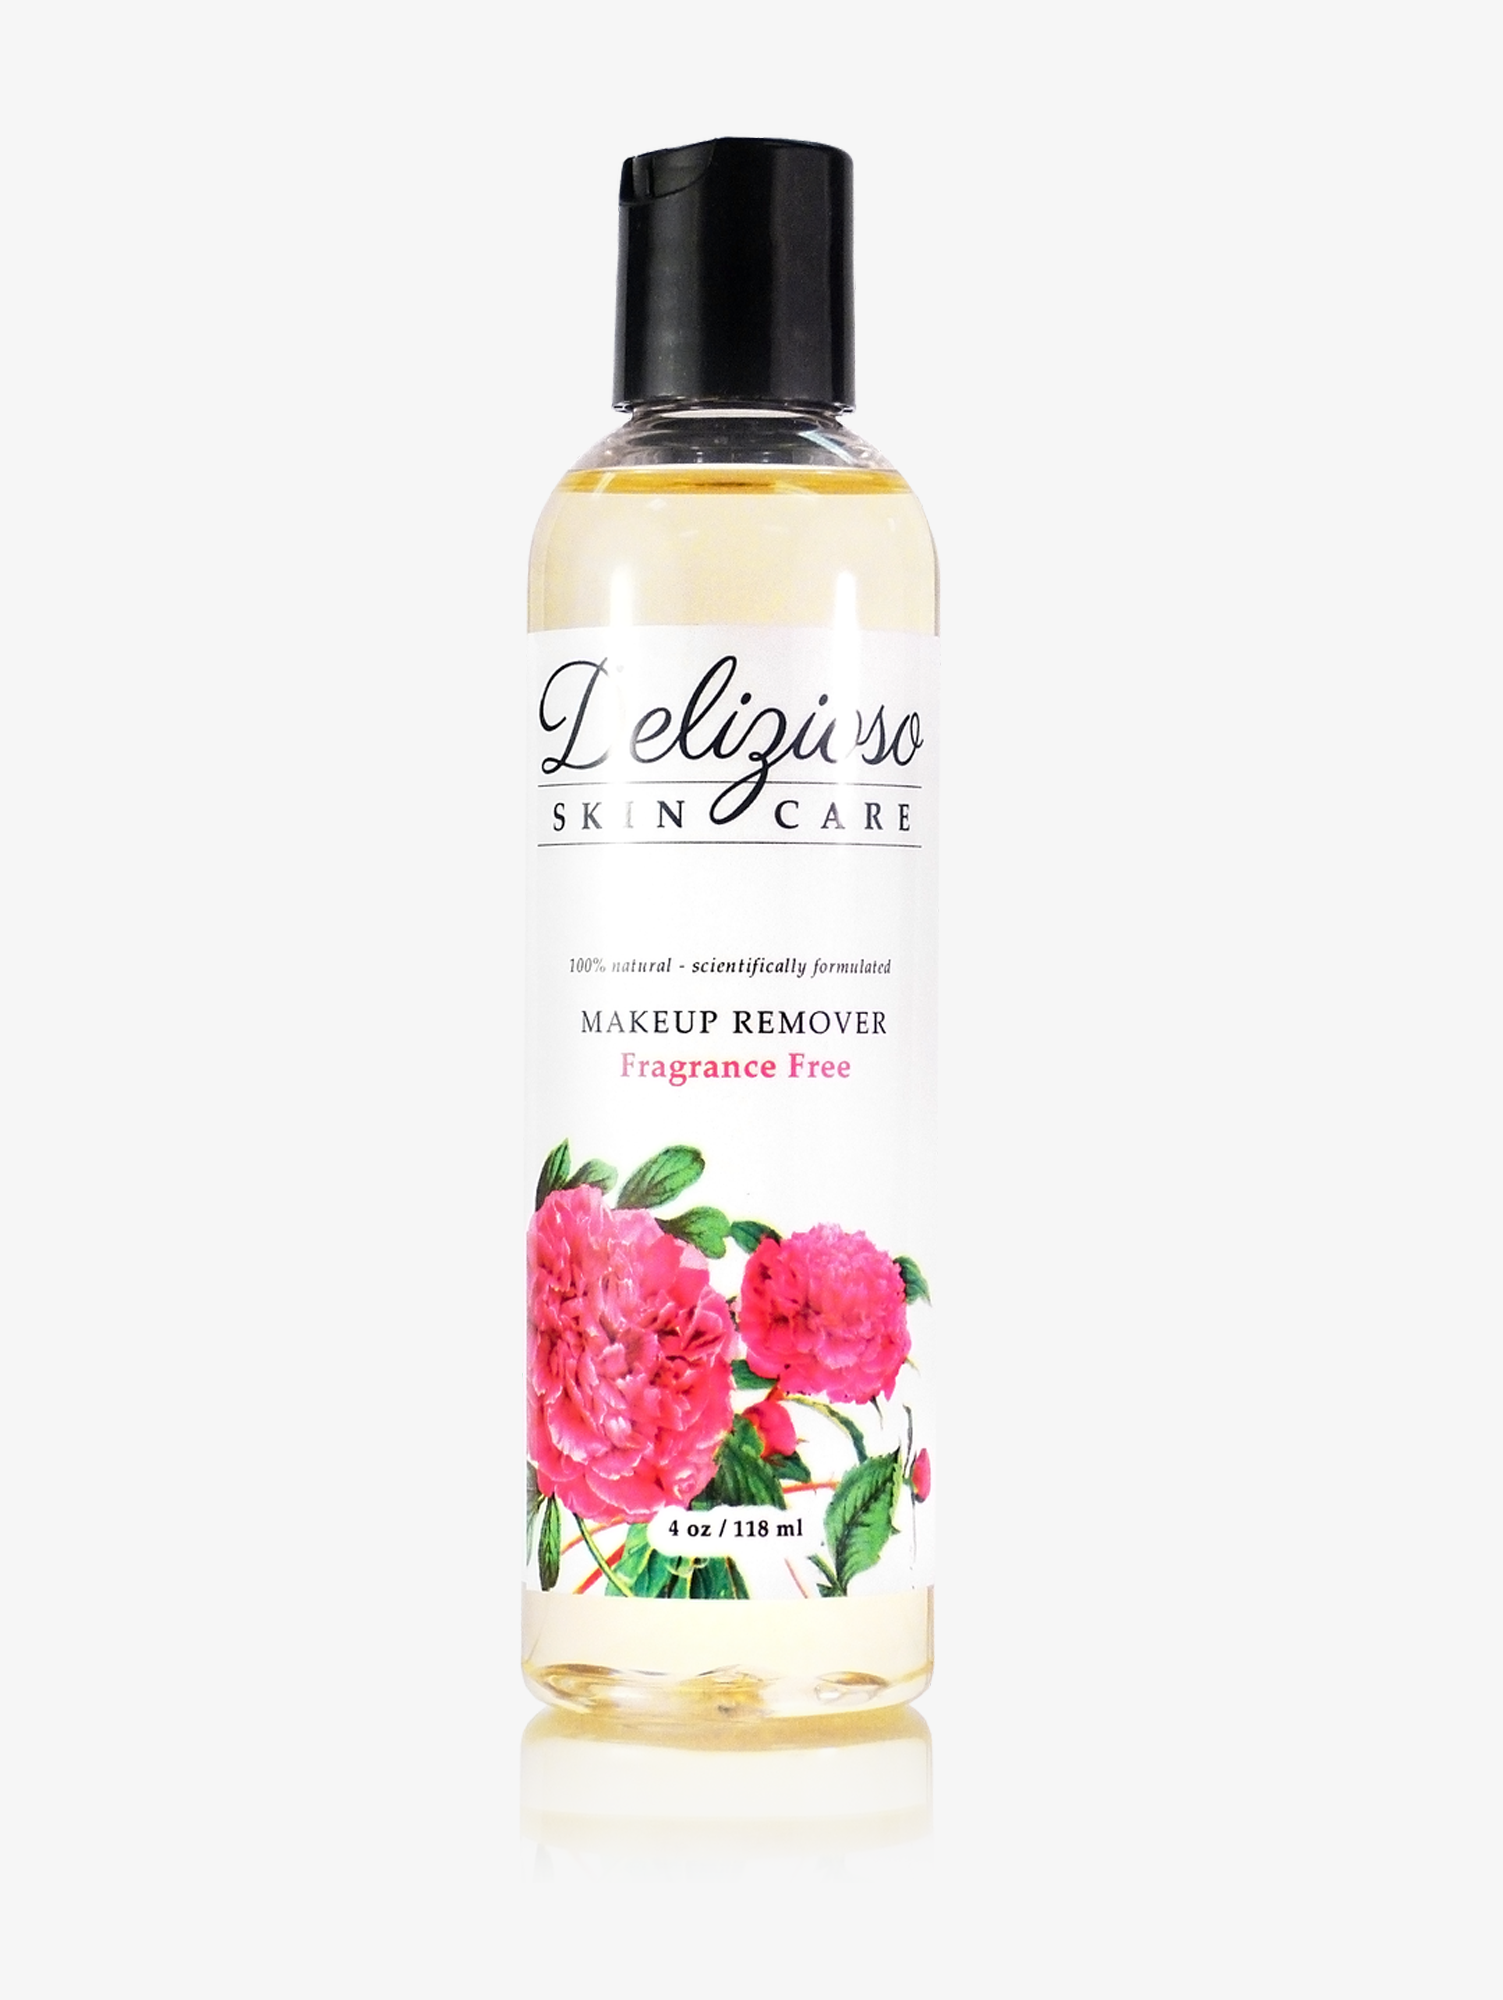 Fragrance Free Makeup Remover